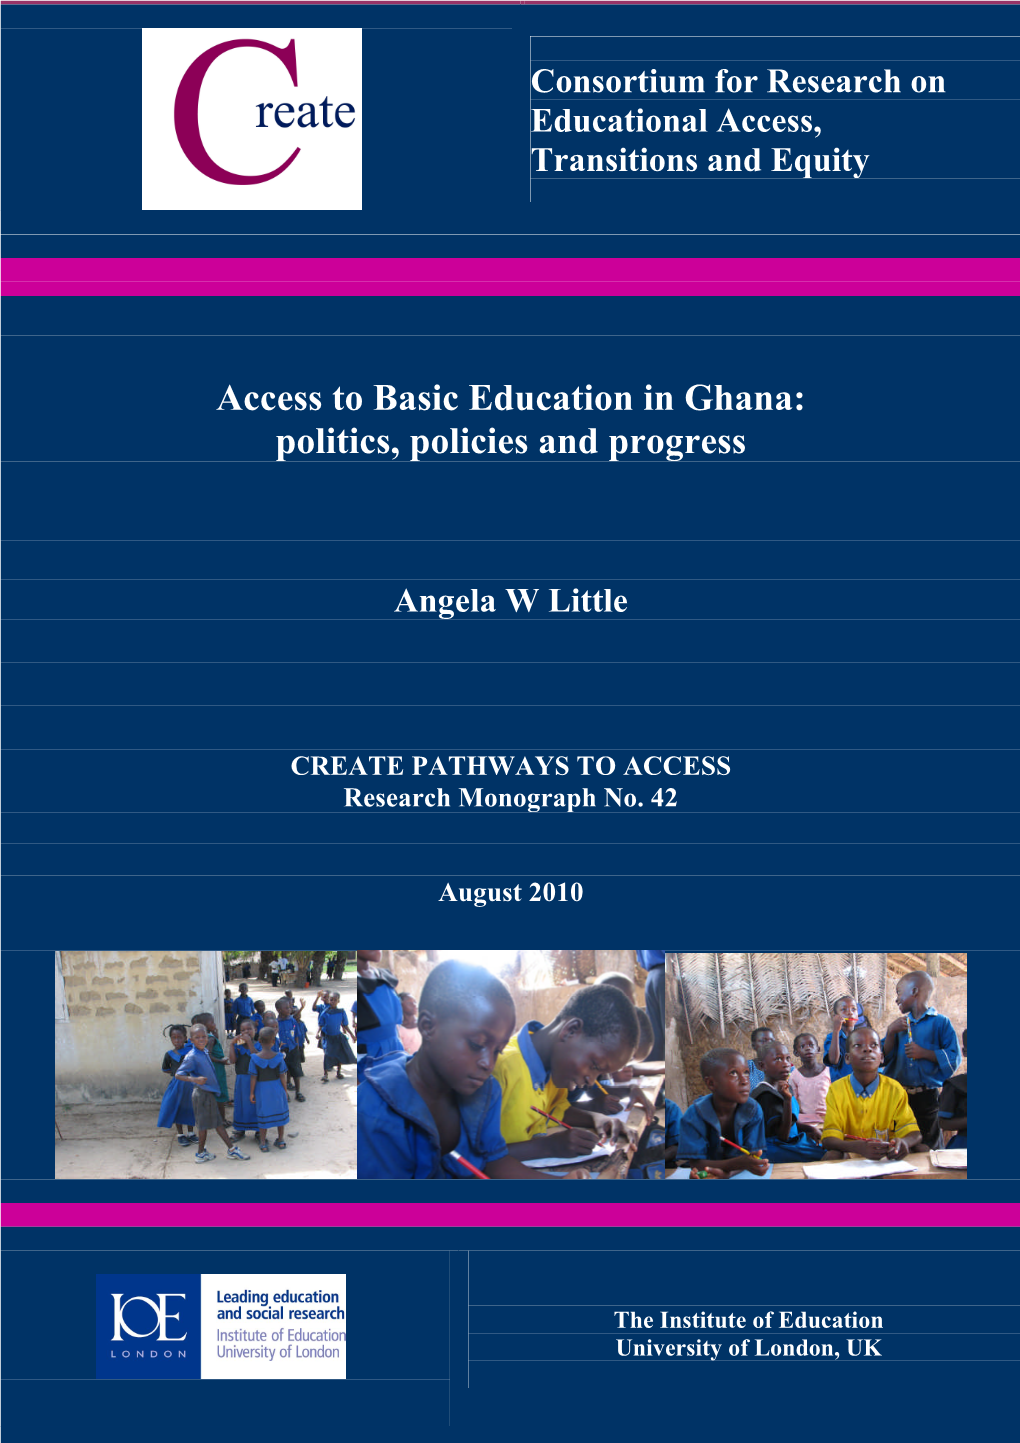 Access to Basic Education in Ghana: Politics, Policies and Progress